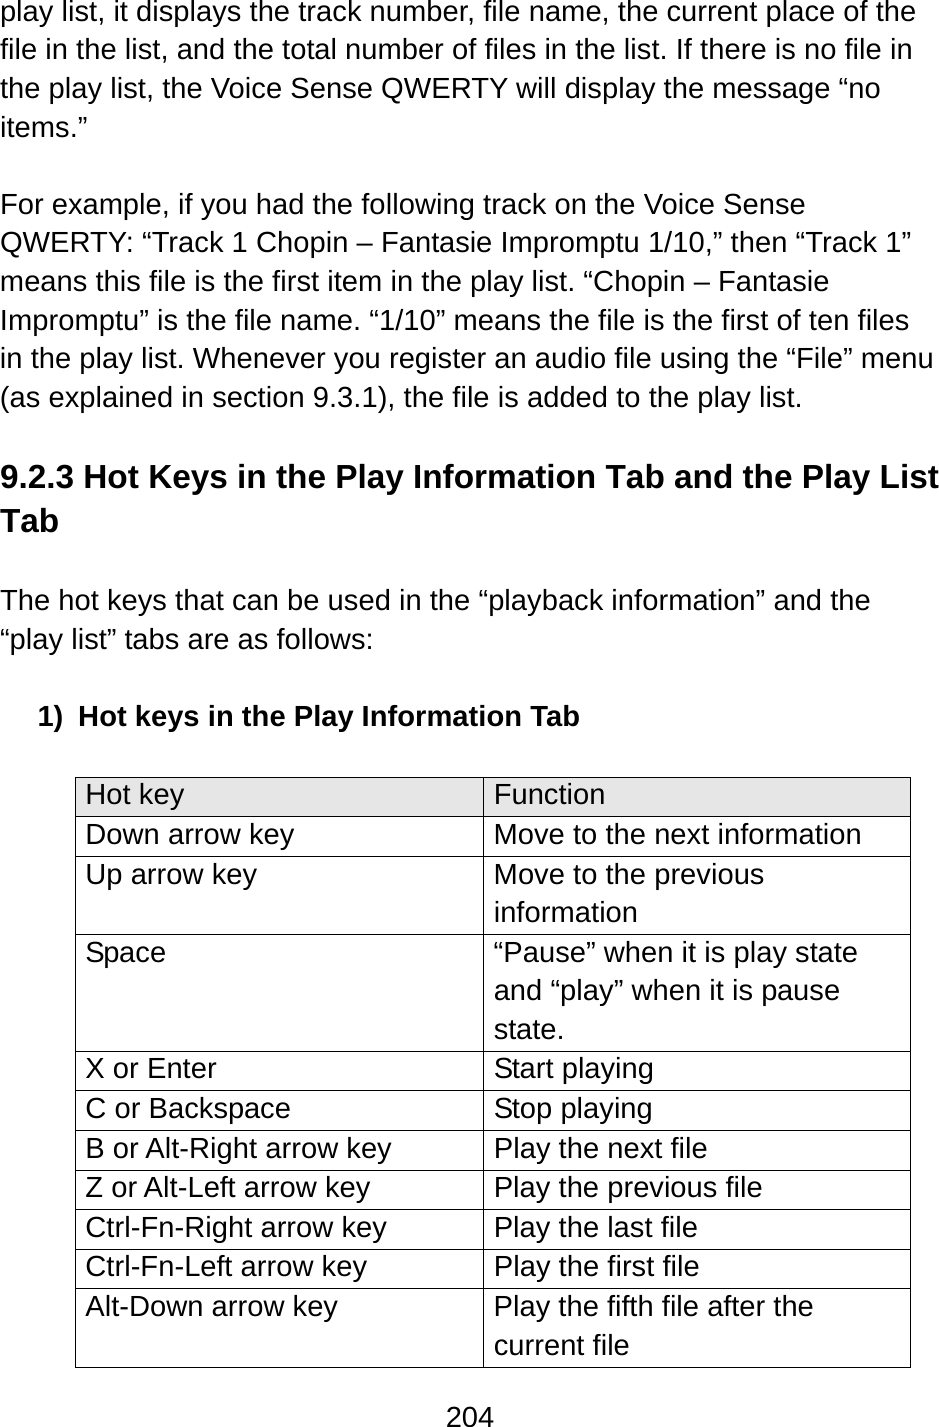 204  play list, it displays the track number, file name, the current place of the file in the list, and the total number of files in the list. If there is no file in the play list, the Voice Sense QWERTY will display the message “no items.”   For example, if you had the following track on the Voice Sense QWERTY: “Track 1 Chopin – Fantasie Impromptu 1/10,” then “Track 1” means this file is the first item in the play list. “Chopin – Fantasie Impromptu” is the file name. “1/10” means the file is the first of ten files in the play list. Whenever you register an audio file using the “File” menu (as explained in section 9.3.1), the file is added to the play list.  9.2.3 Hot Keys in the Play Information Tab and the Play List Tab  The hot keys that can be used in the “playback information” and the “play list” tabs are as follows:  1)  Hot keys in the Play Information Tab  Hot key  Function Down arrow key  Move to the next information Up arrow key  Move to the previous information Space  “Pause” when it is play state and “play” when it is pause state. X or Enter  Start playing C or Backspace  Stop playing B or Alt-Right arrow key  Play the next file Z or Alt-Left arrow key  Play the previous file Ctrl-Fn-Right arrow key  Play the last file Ctrl-Fn-Left arrow key  Play the first file Alt-Down arrow key  Play the fifth file after the current file 